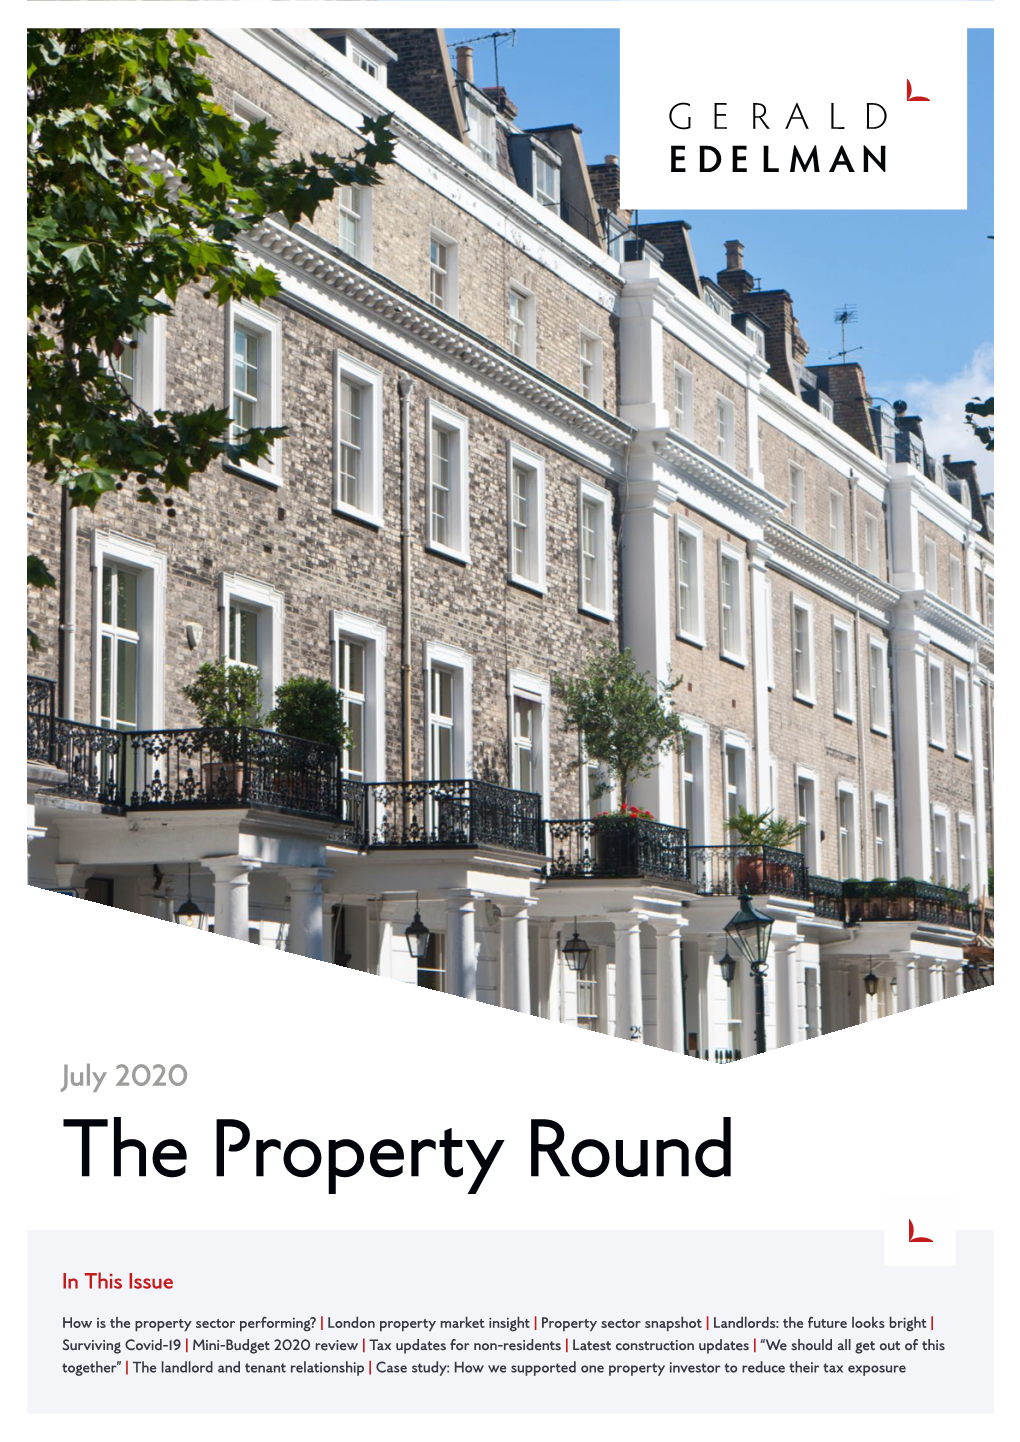 The Property Round